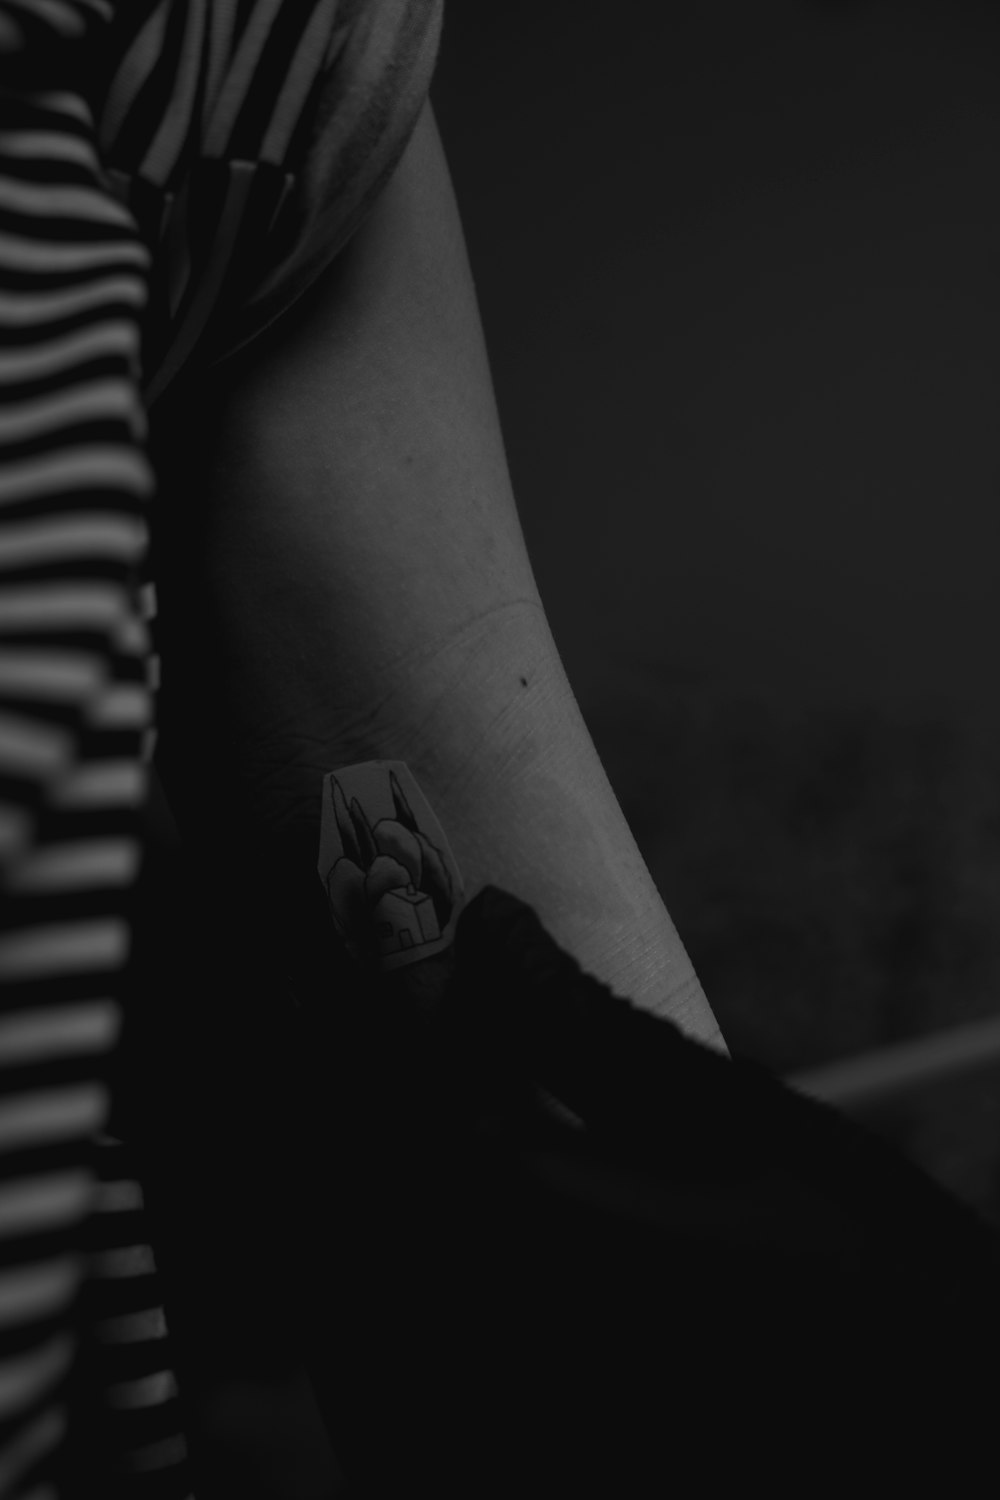 a person's arm with a tattoo on it